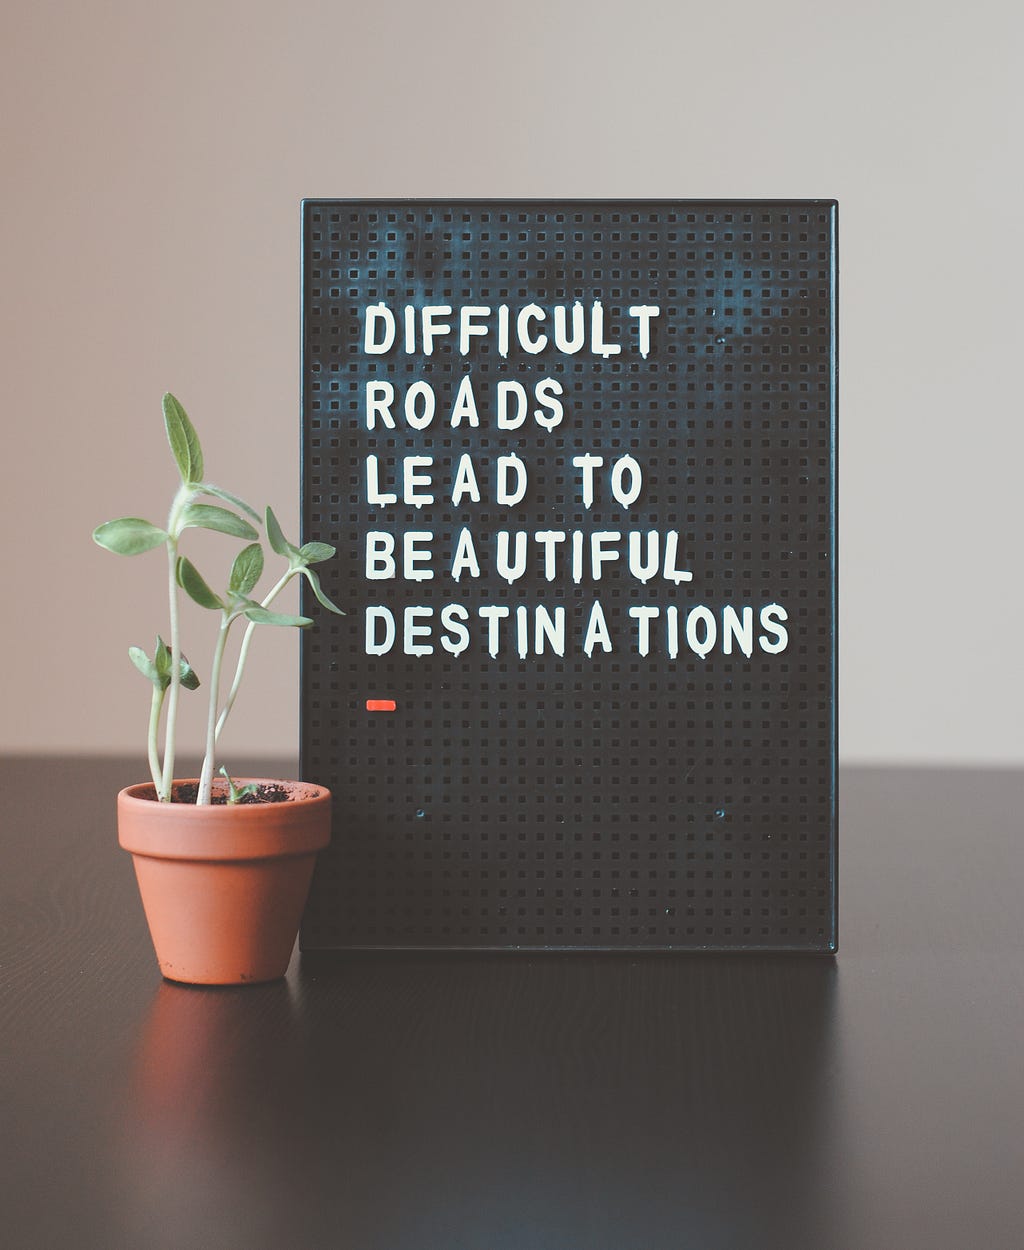 A potted plant next to the text “Difficult roads lead to beautiful destinations”